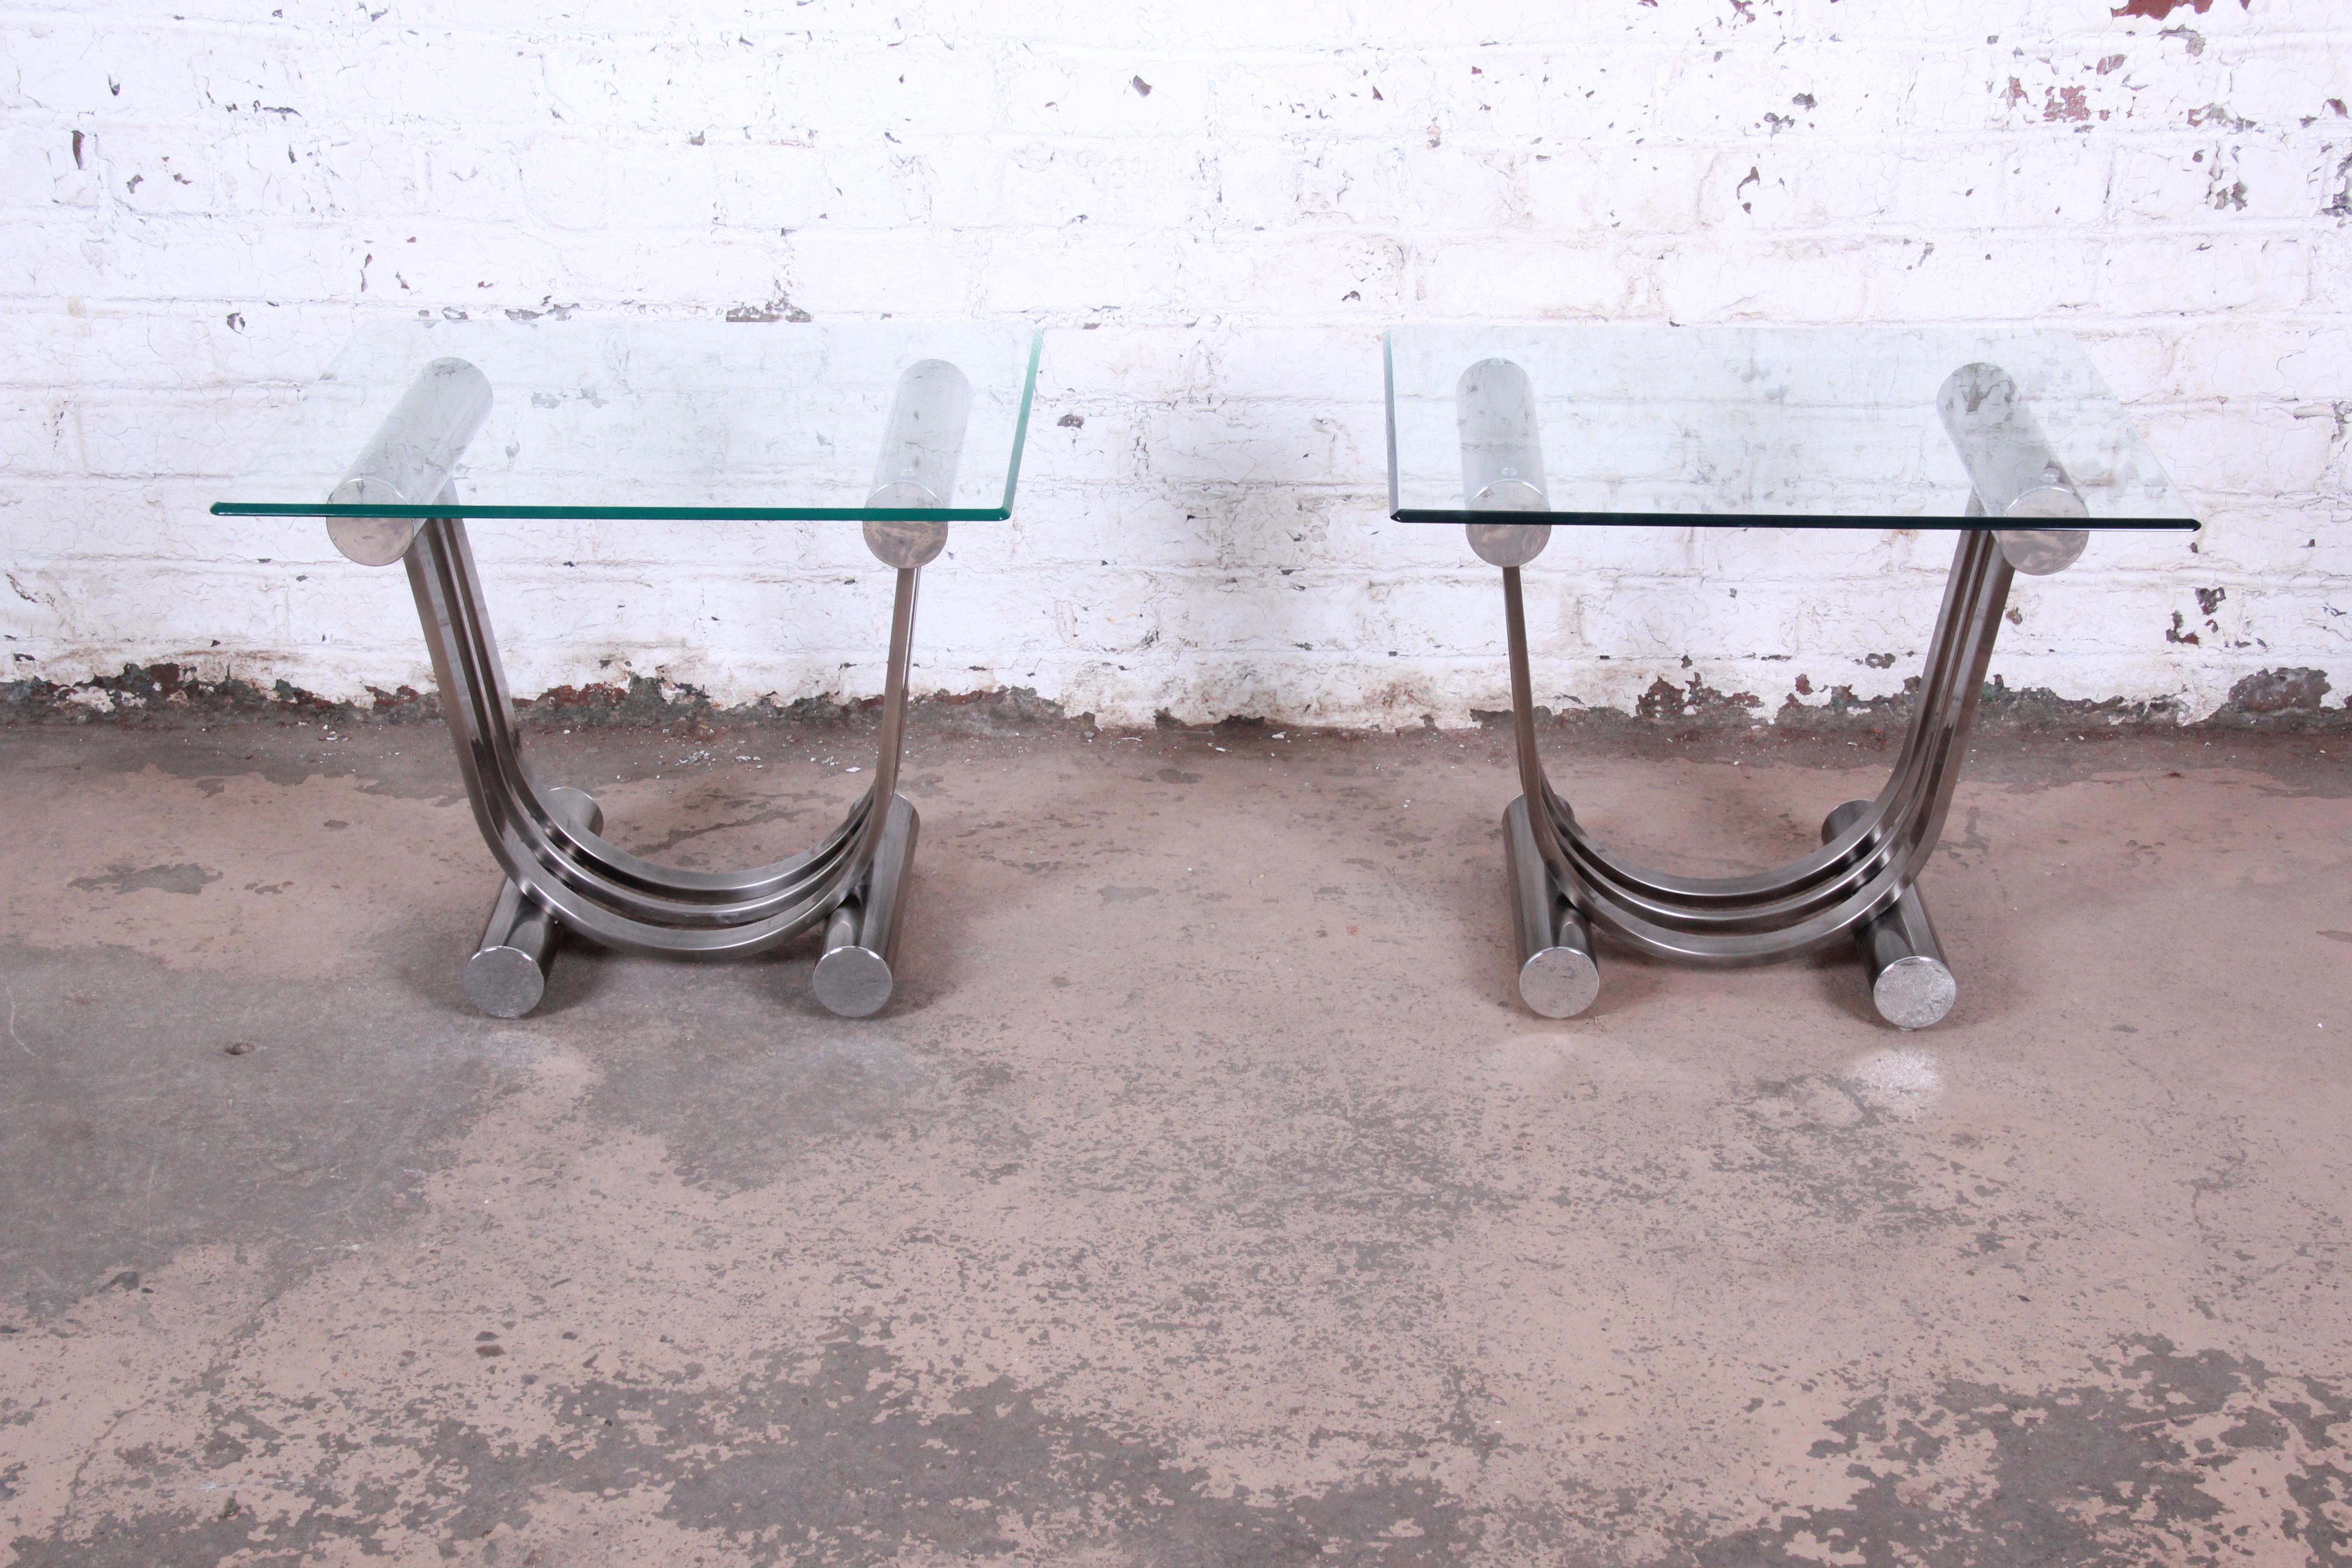 A unique pair of Art Deco style chrome and glass side tables by Design Institute America. The tables feature harp-shaped chrome bases and thick glass tops. The original DIA labels are present. The tables are in excellent original vintage condition.